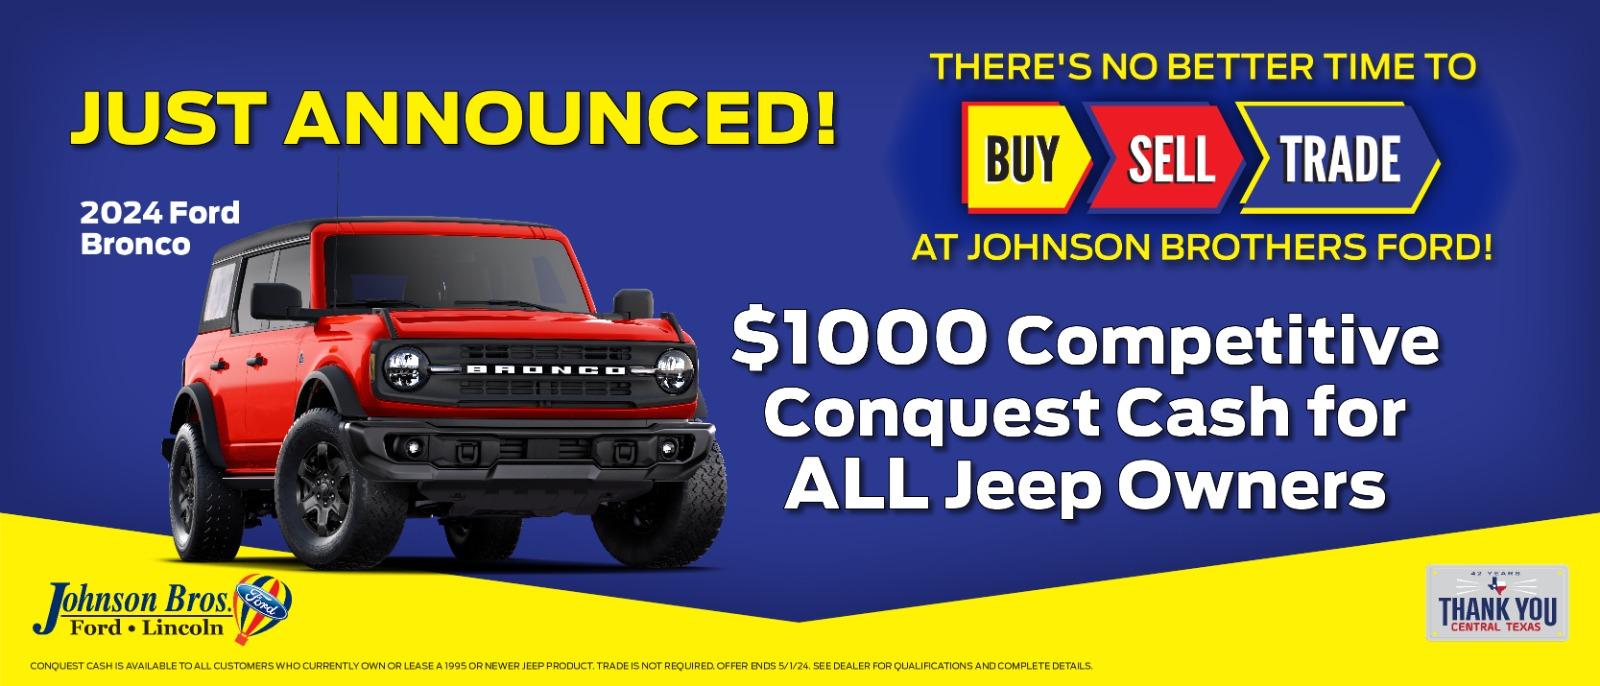 2024 Ford Bronco

$1,000 Competitive Conquest Cash for ALL Jeep Owners